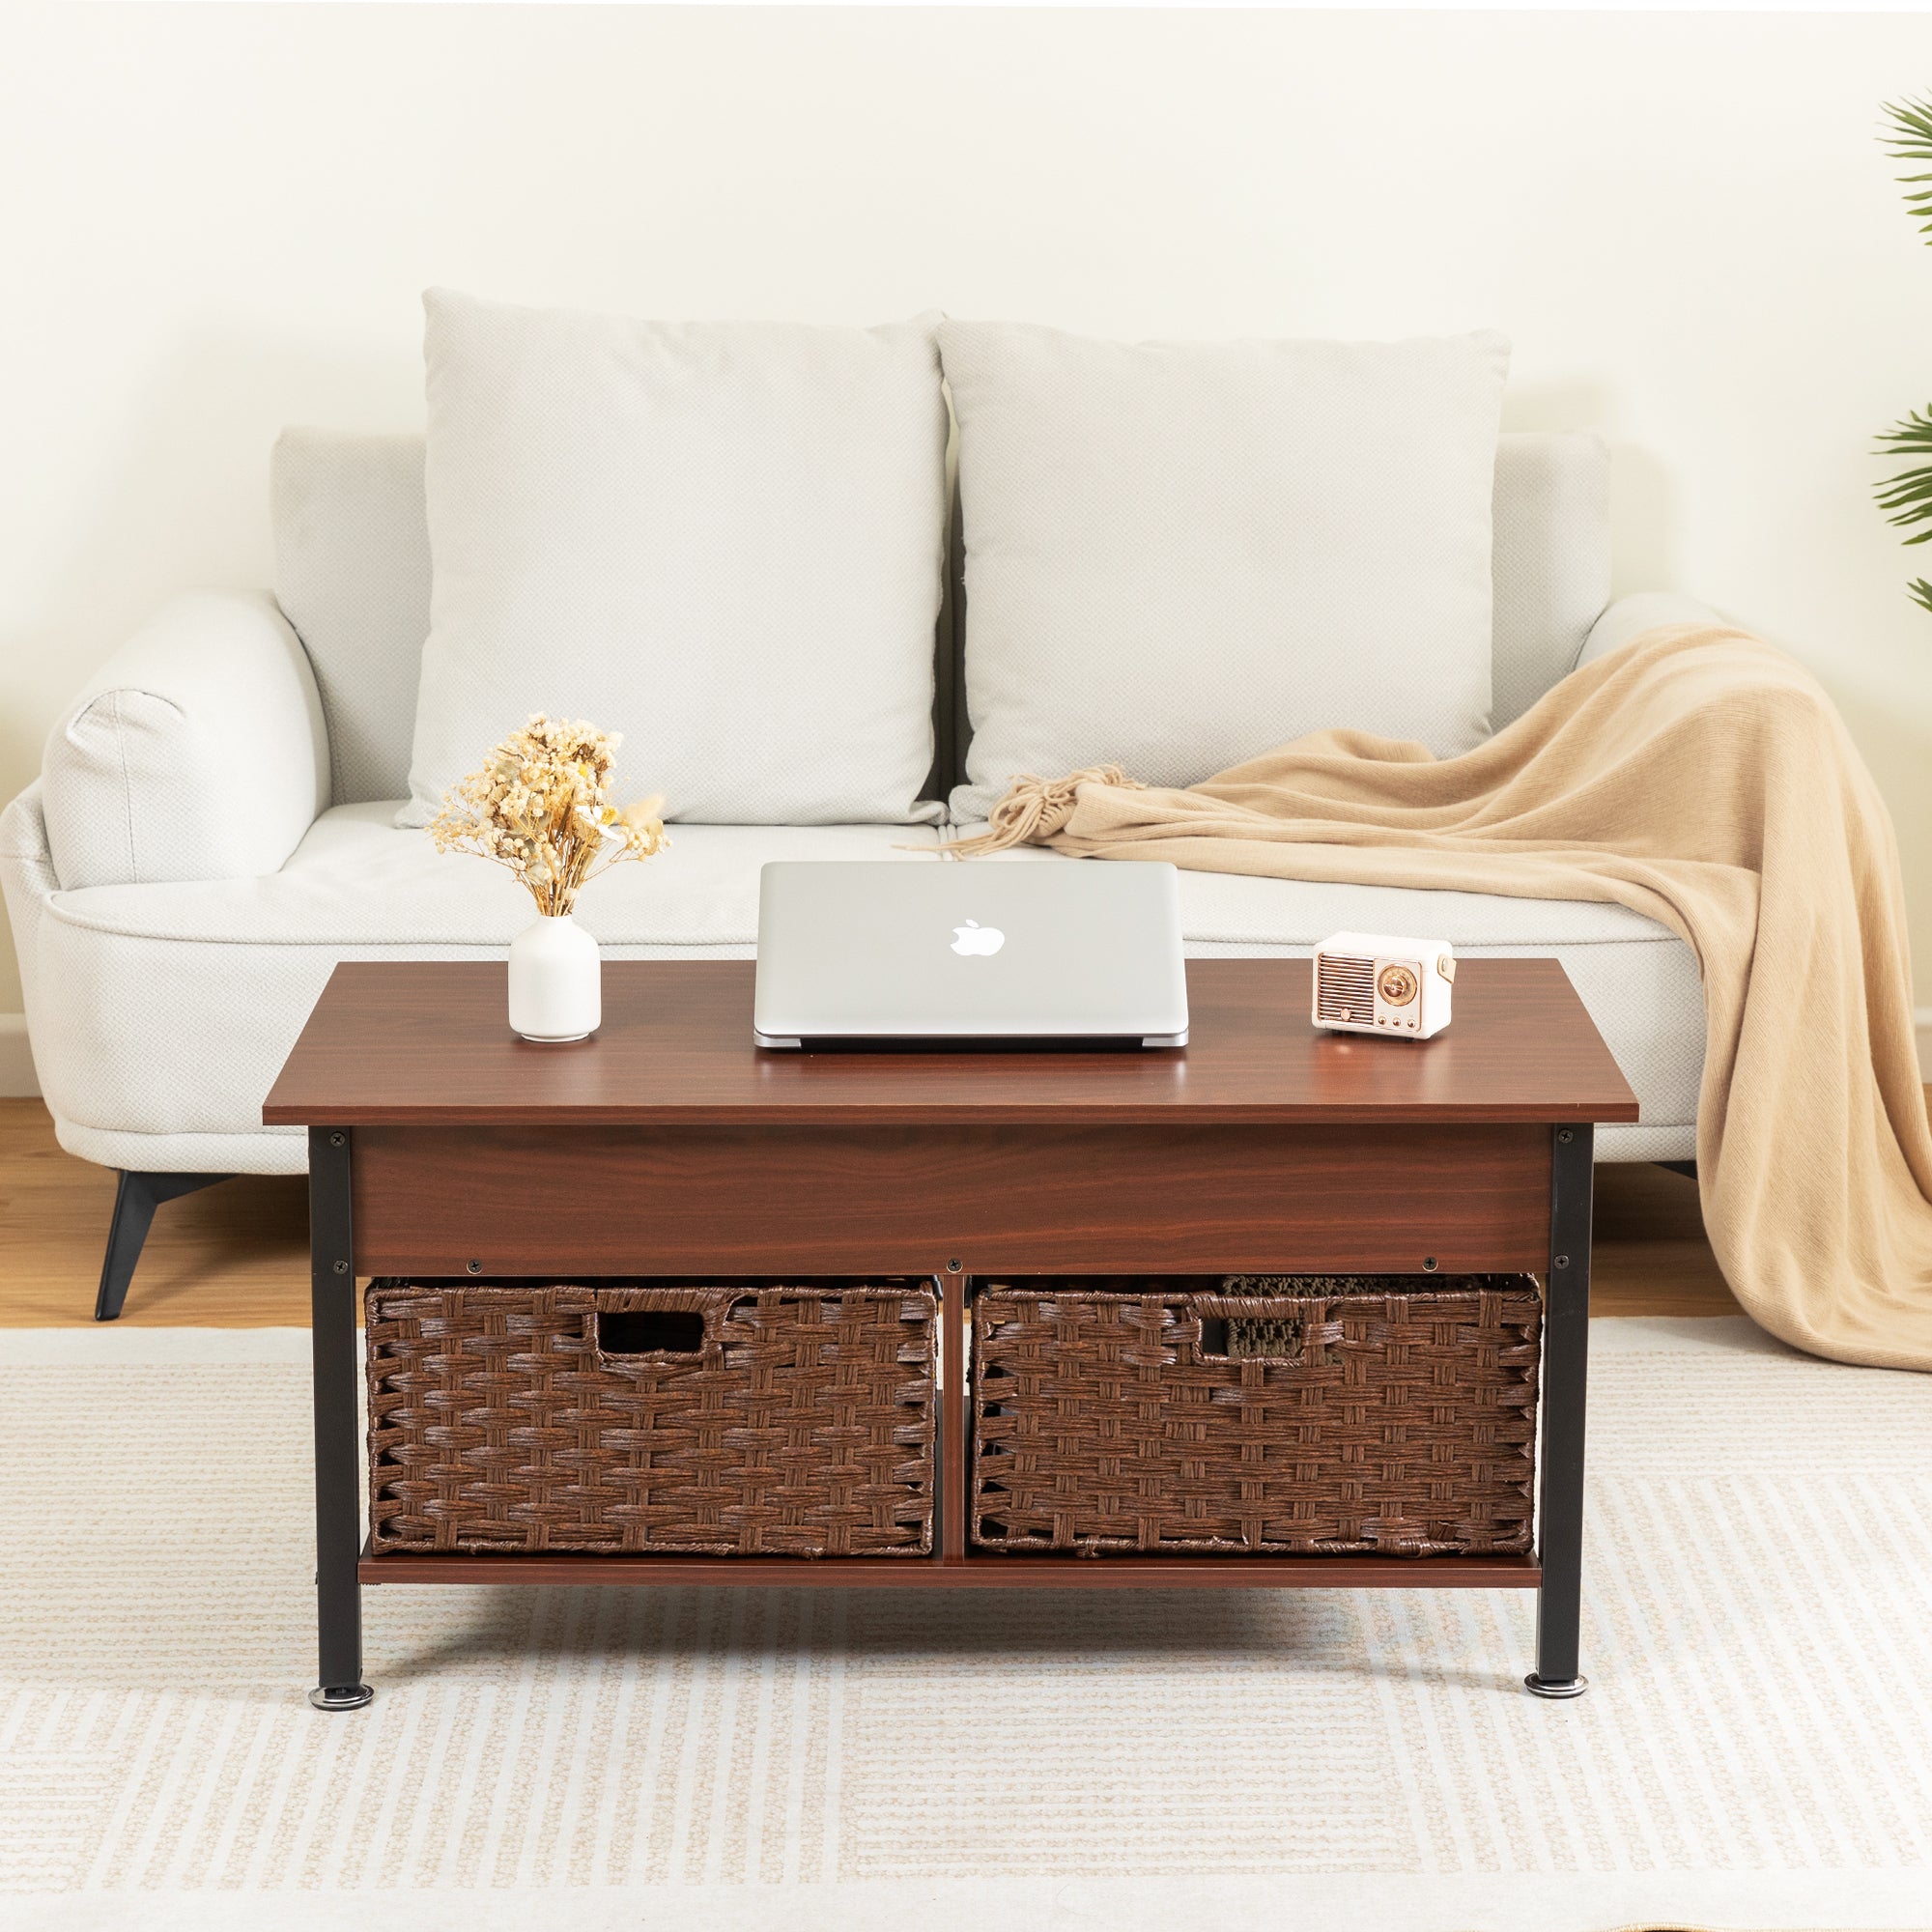 🆓🚛 Metal Coffee Table, Desk, With a Lifting Table, and Hidden Storage Space.There Were Two Removable Wicker Baskets That Could Be Placed In Any Space Such As The Living Room, Color:Brownwith Solid Wood Grain